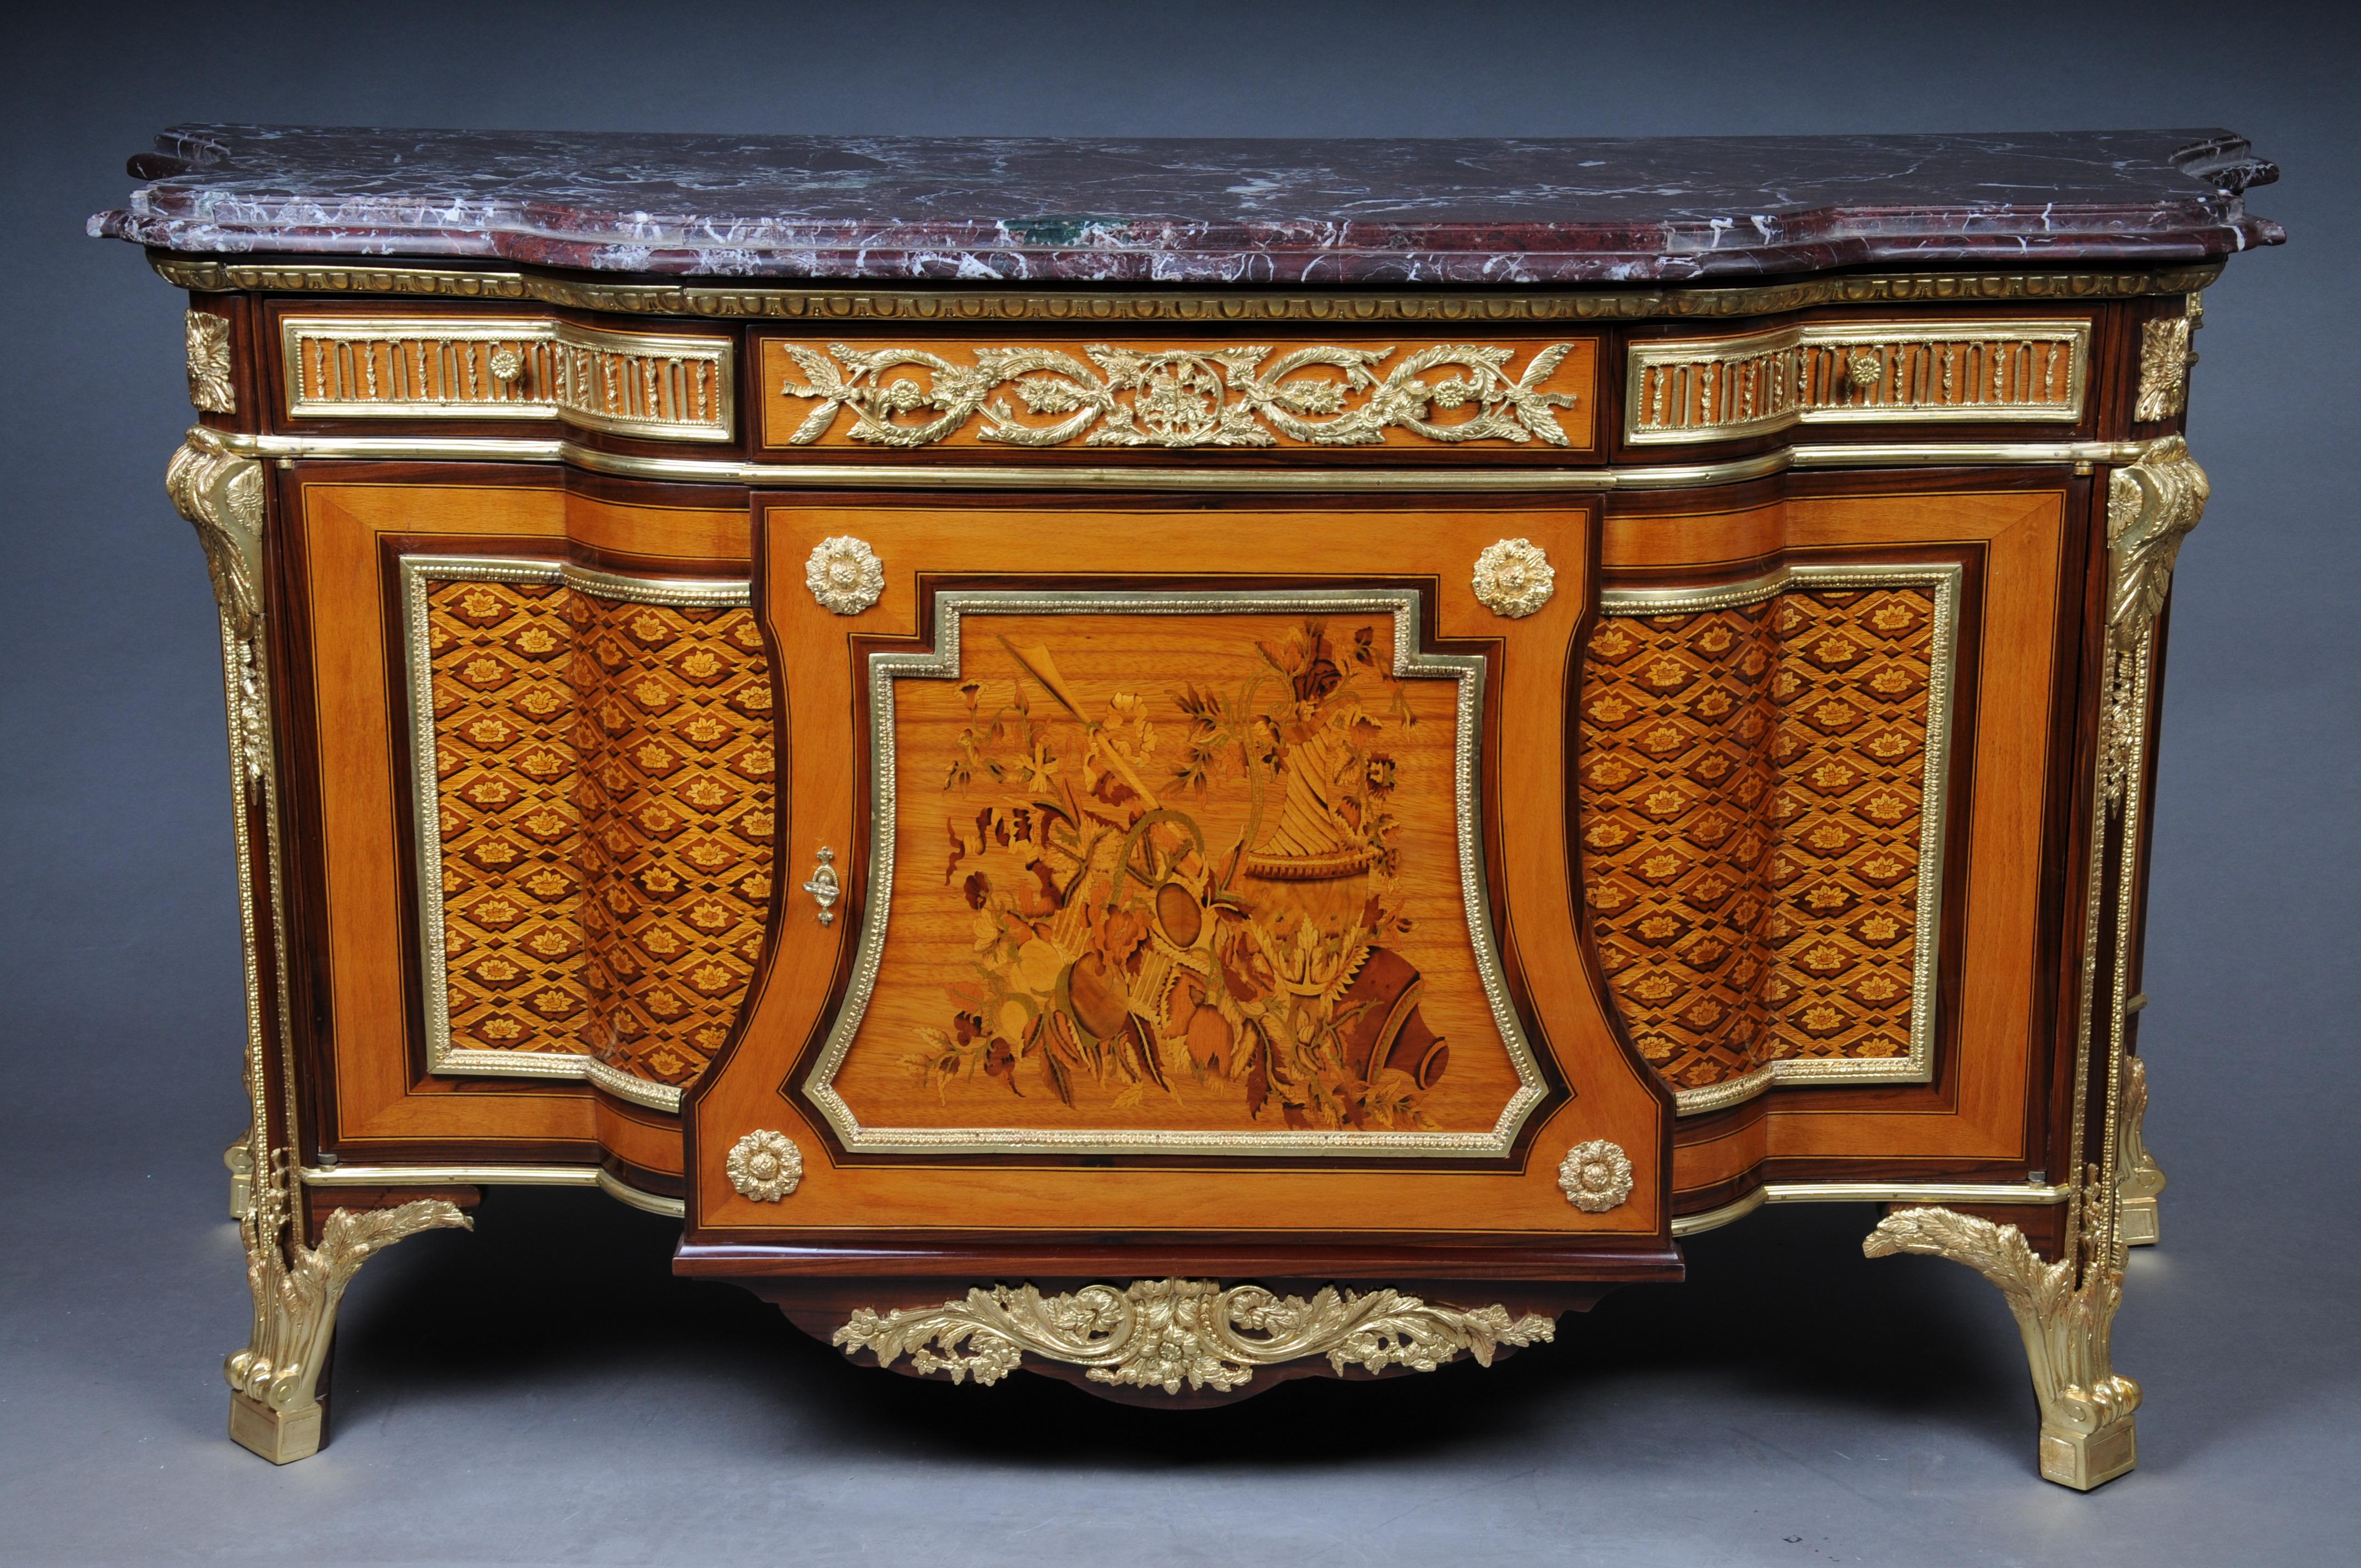 20th Century Louis XVI Style Commode/Chest of Drawers after Jean Henri Riesener

Bronze, gilded or partly dark patinated. Marble plate, over three frying chunks and a large two-thirds chimney door, with amaranth, bergahorn and colorful fruitwood